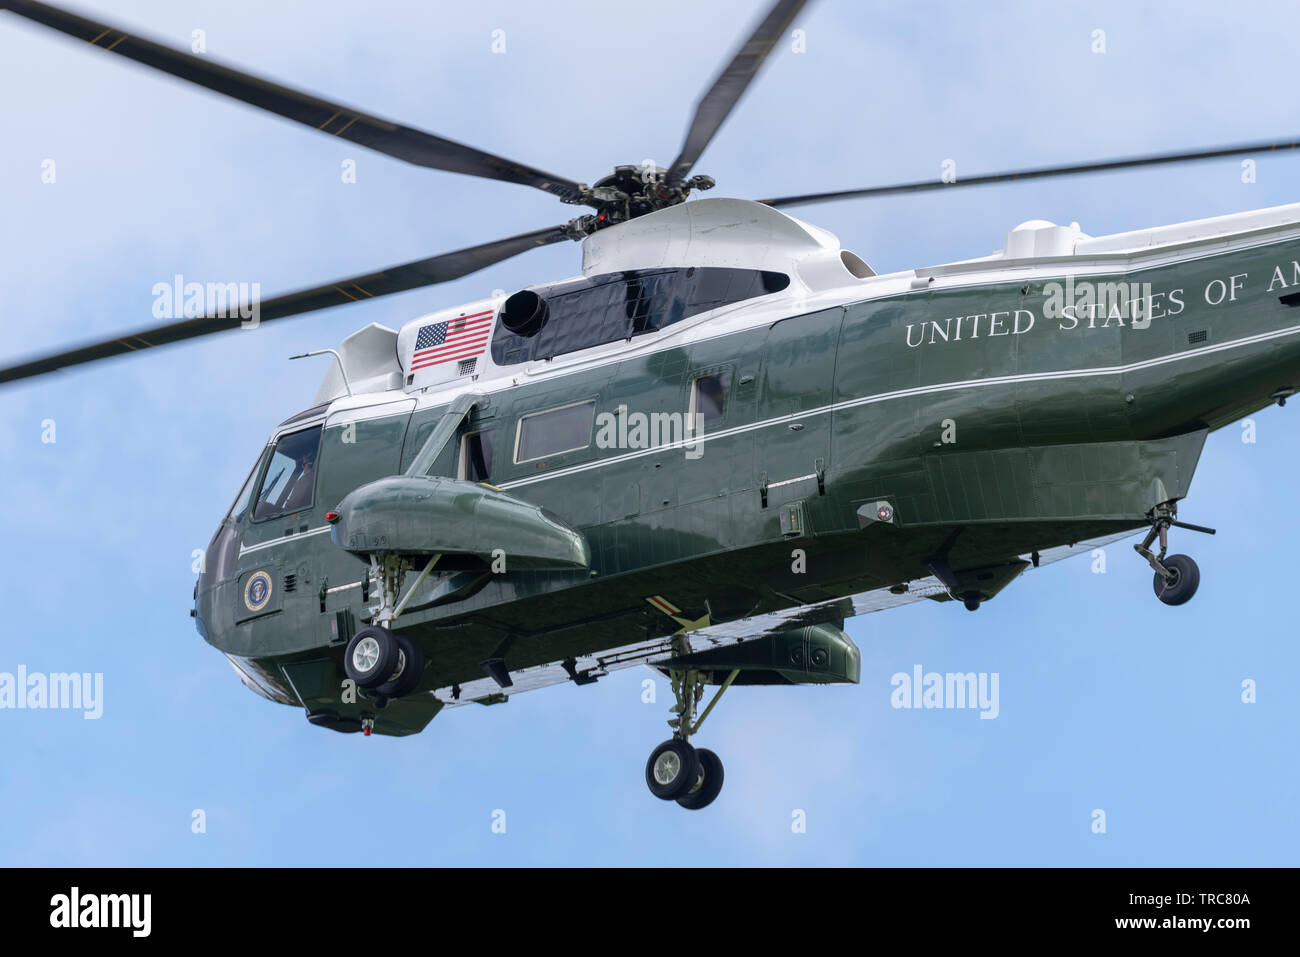 US President Donald Trump arriving for State Visit at Winfield House, the official residence of the US Ambassador to the UK Woody Johnson, escorted by military units for security and support. The green VH-3D Sea King VIP helicopter carrying Trump has the callsign 'Marine One' but flies with a similar helicopter as decoy. Escorted by 2 US Army Chinook  and police helicopters for security. The group arrived over Winfield House, Regent's Park from Stansted Airport, Essex Stock Photo